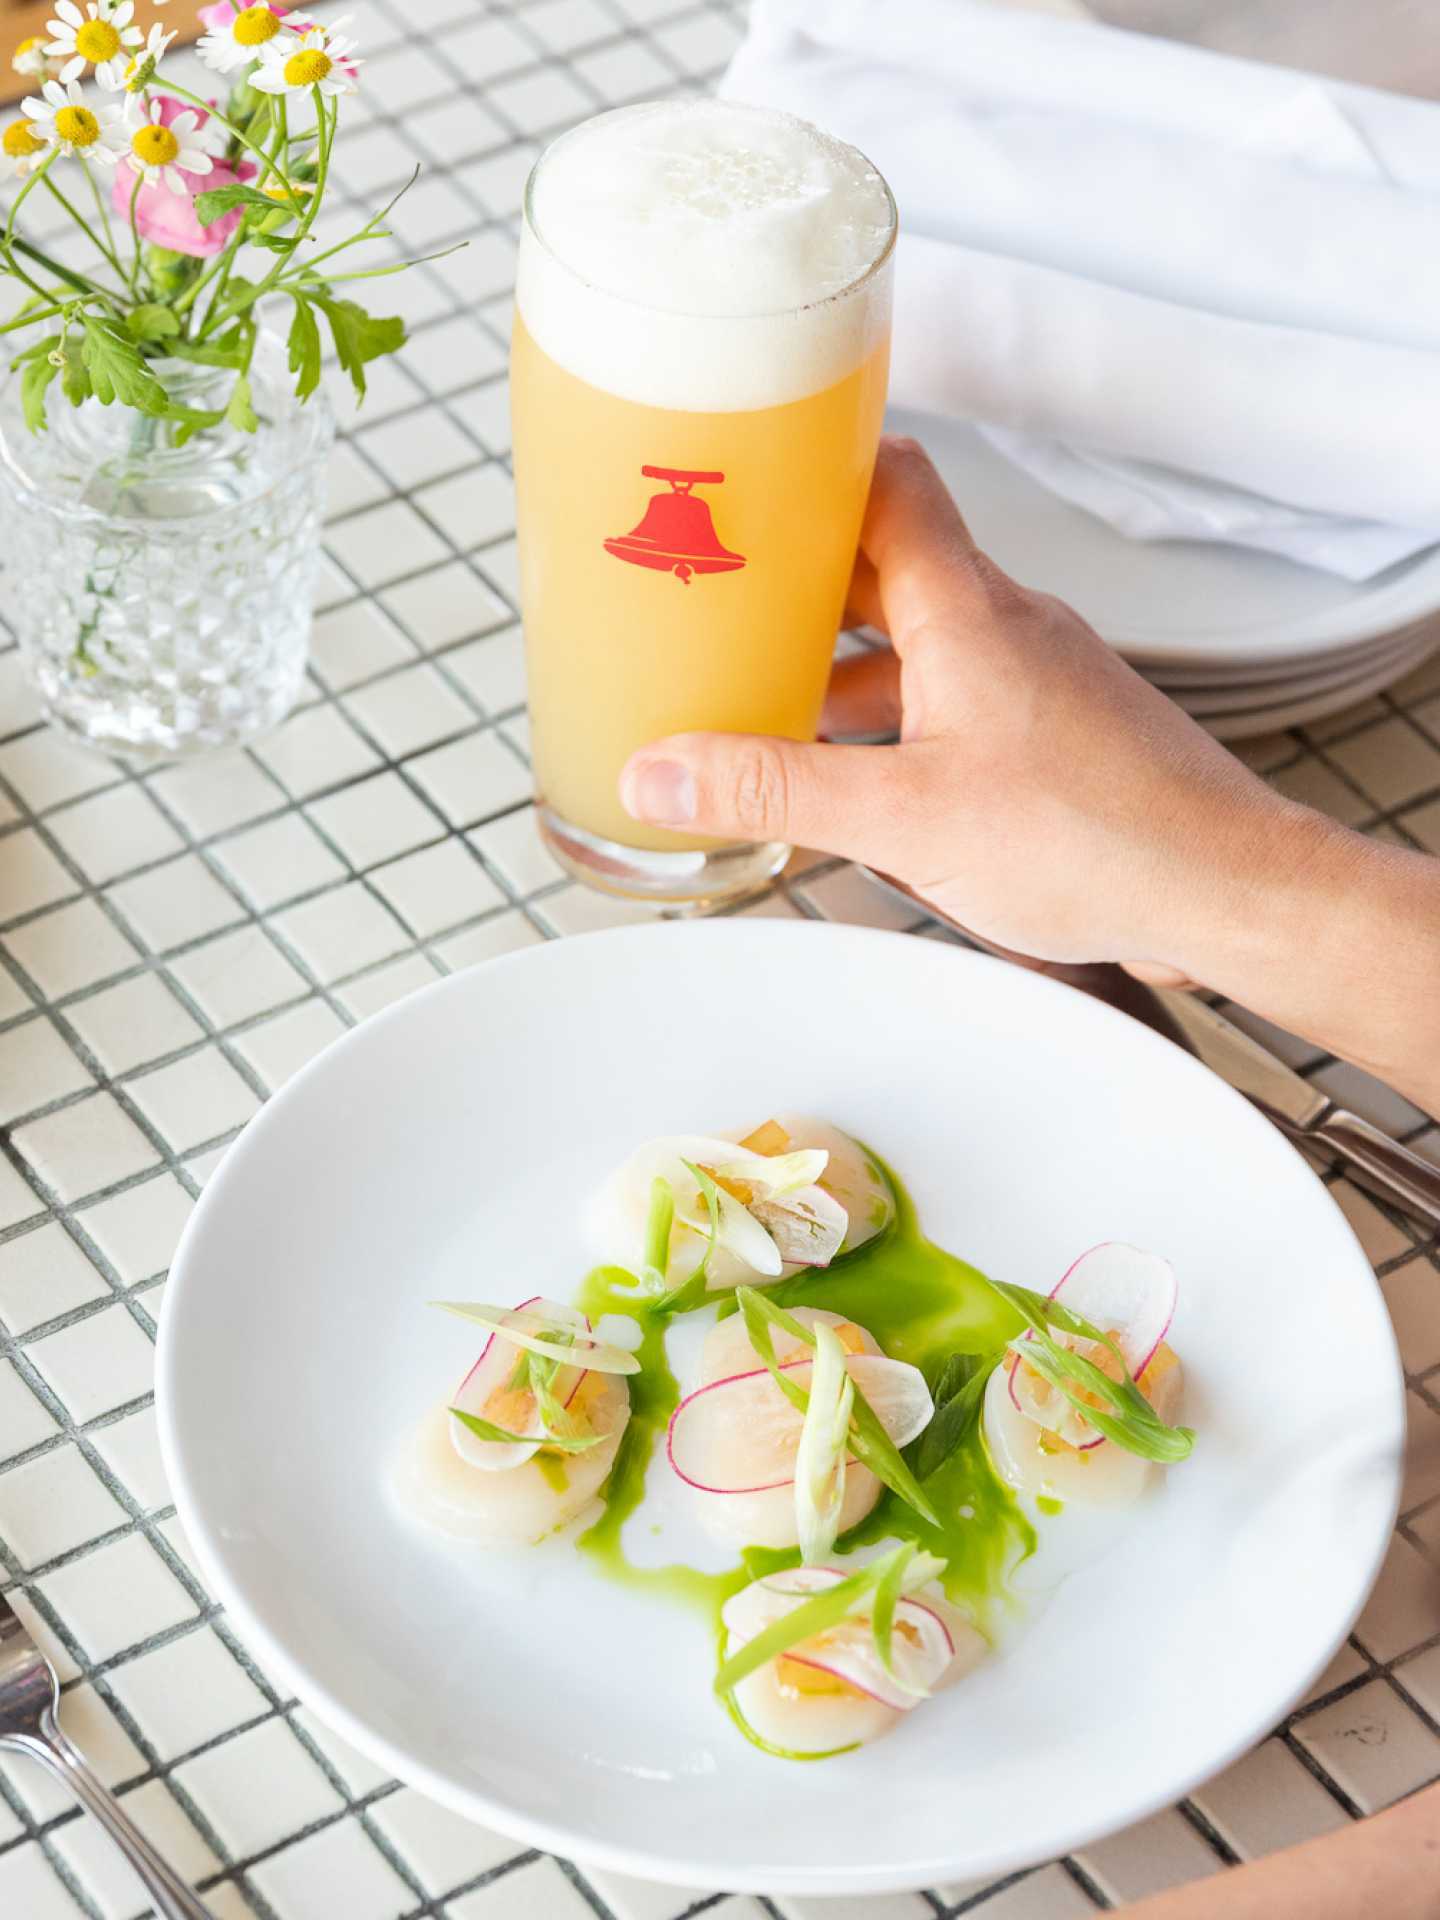 Toronto breweries and alcohol stores | Beer and scallops at Bellwoods Brewery